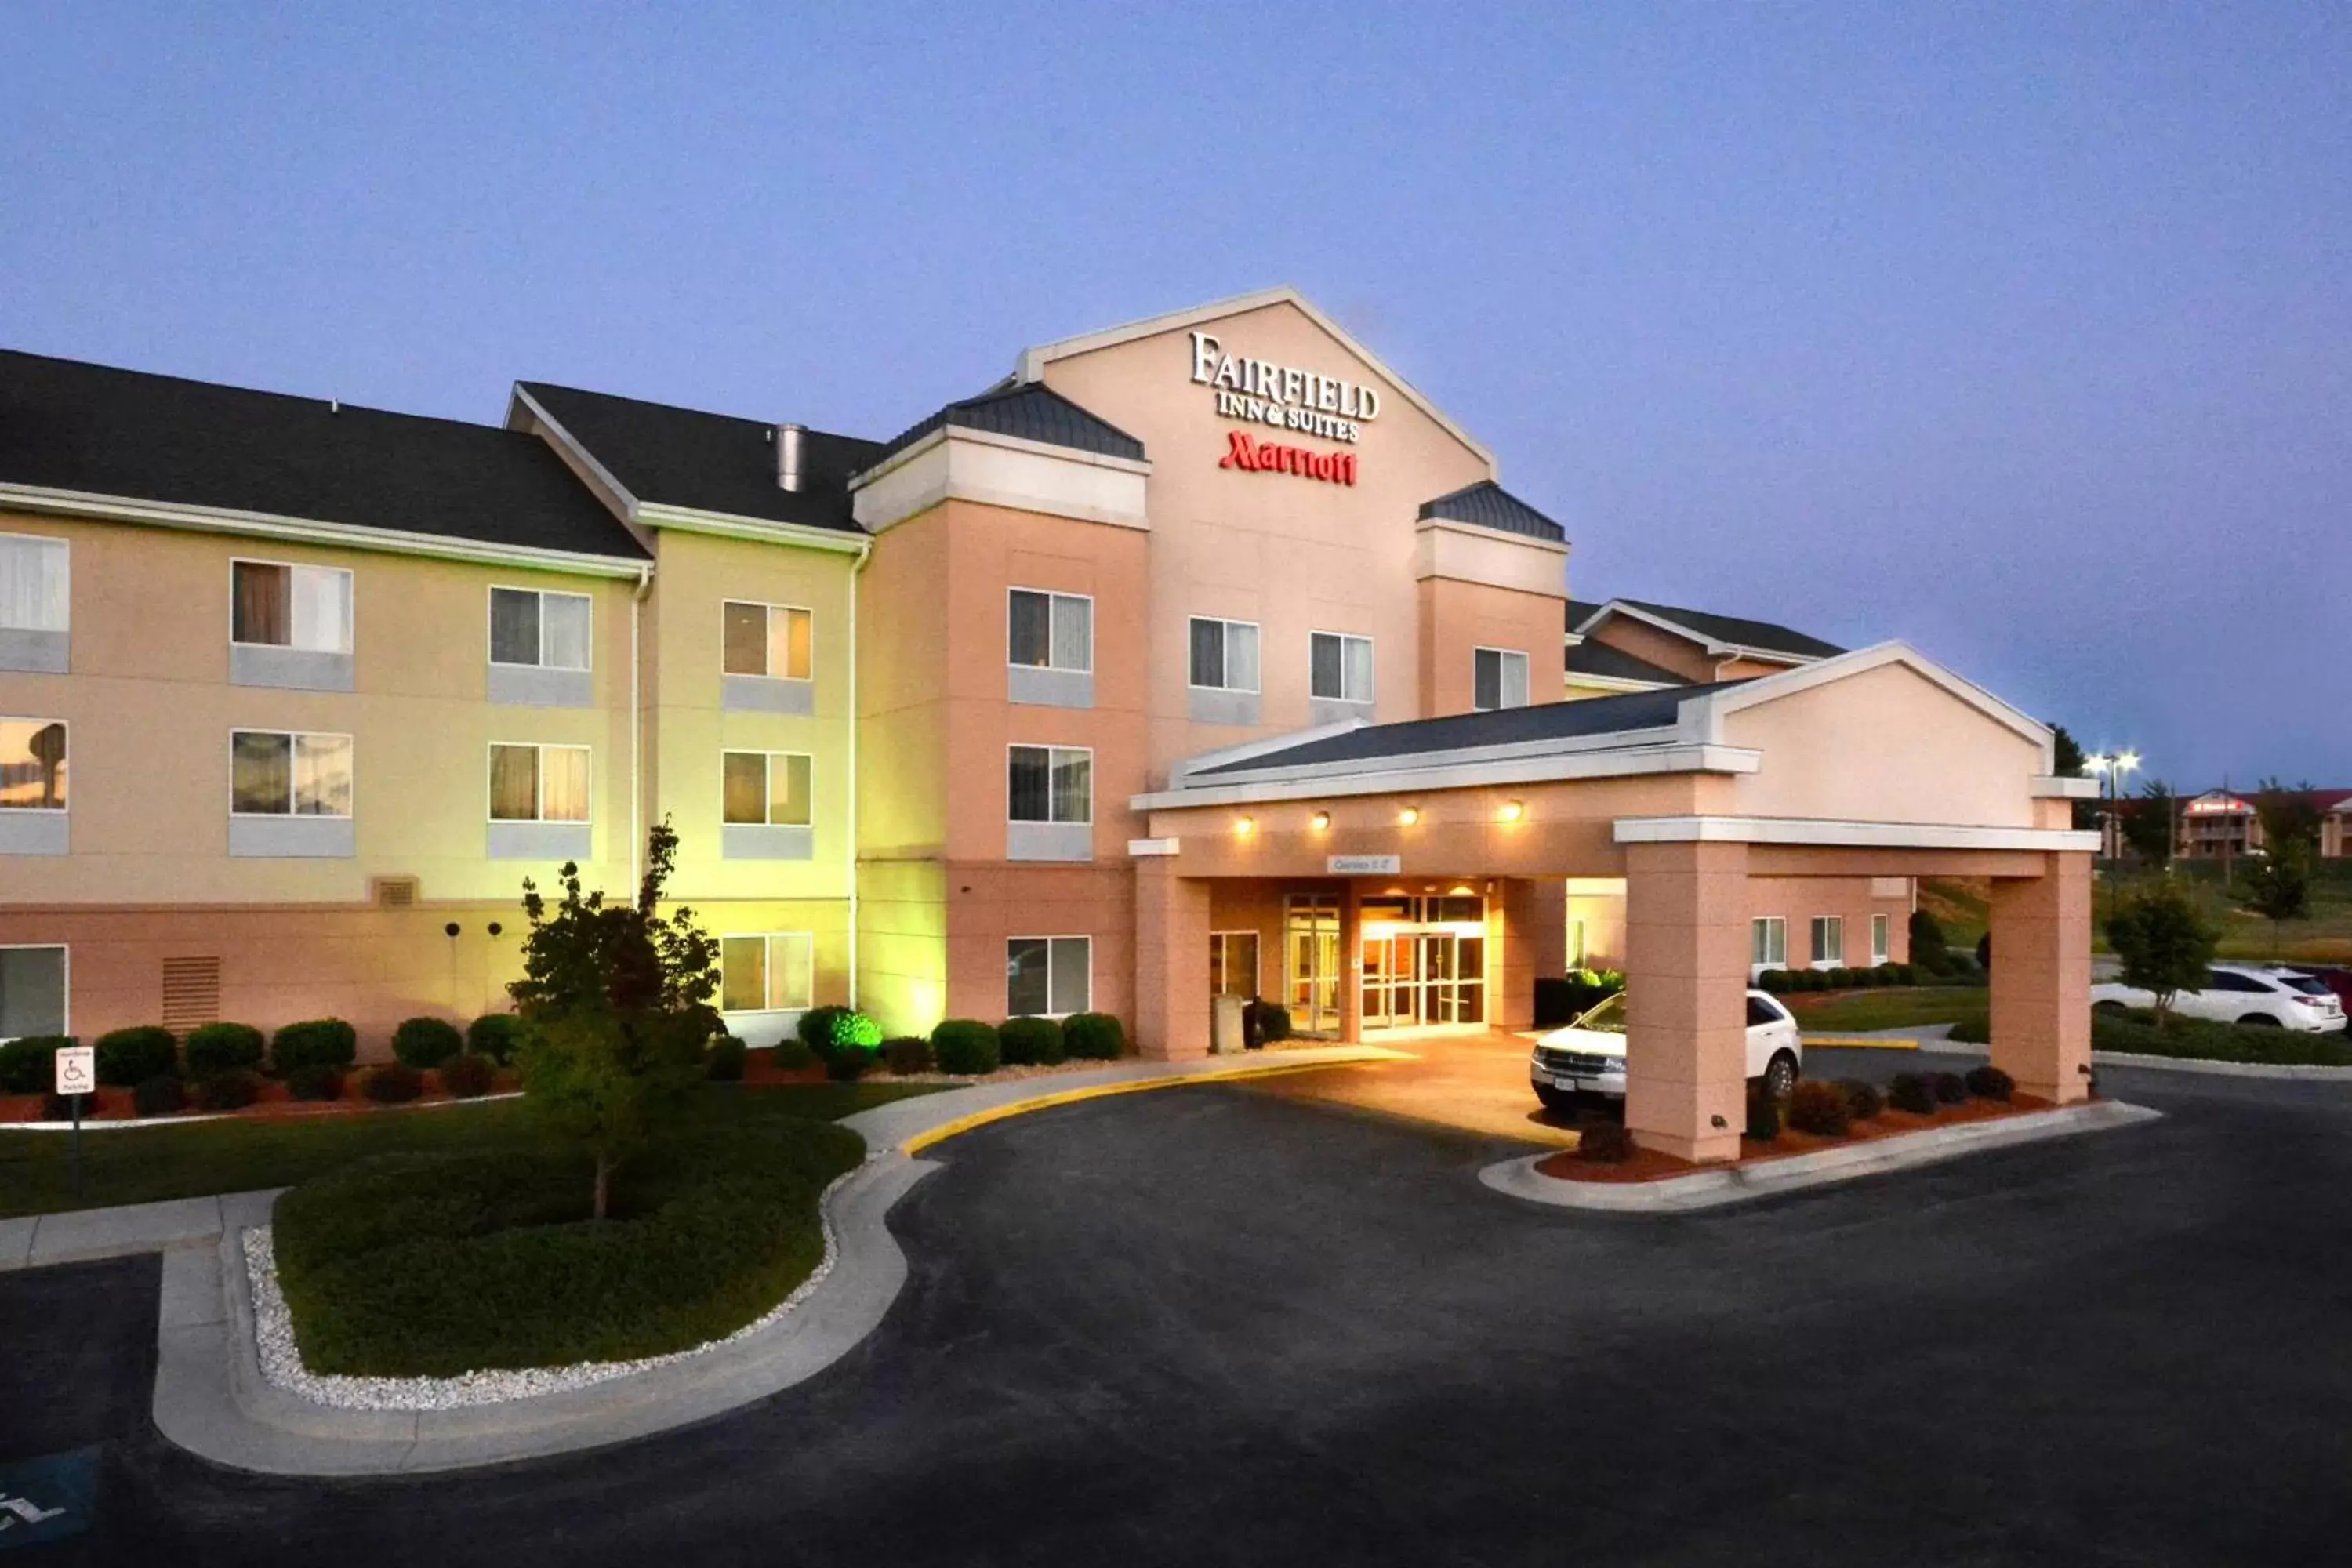 Property Building in Fairfield Inn & Suites Wytheville